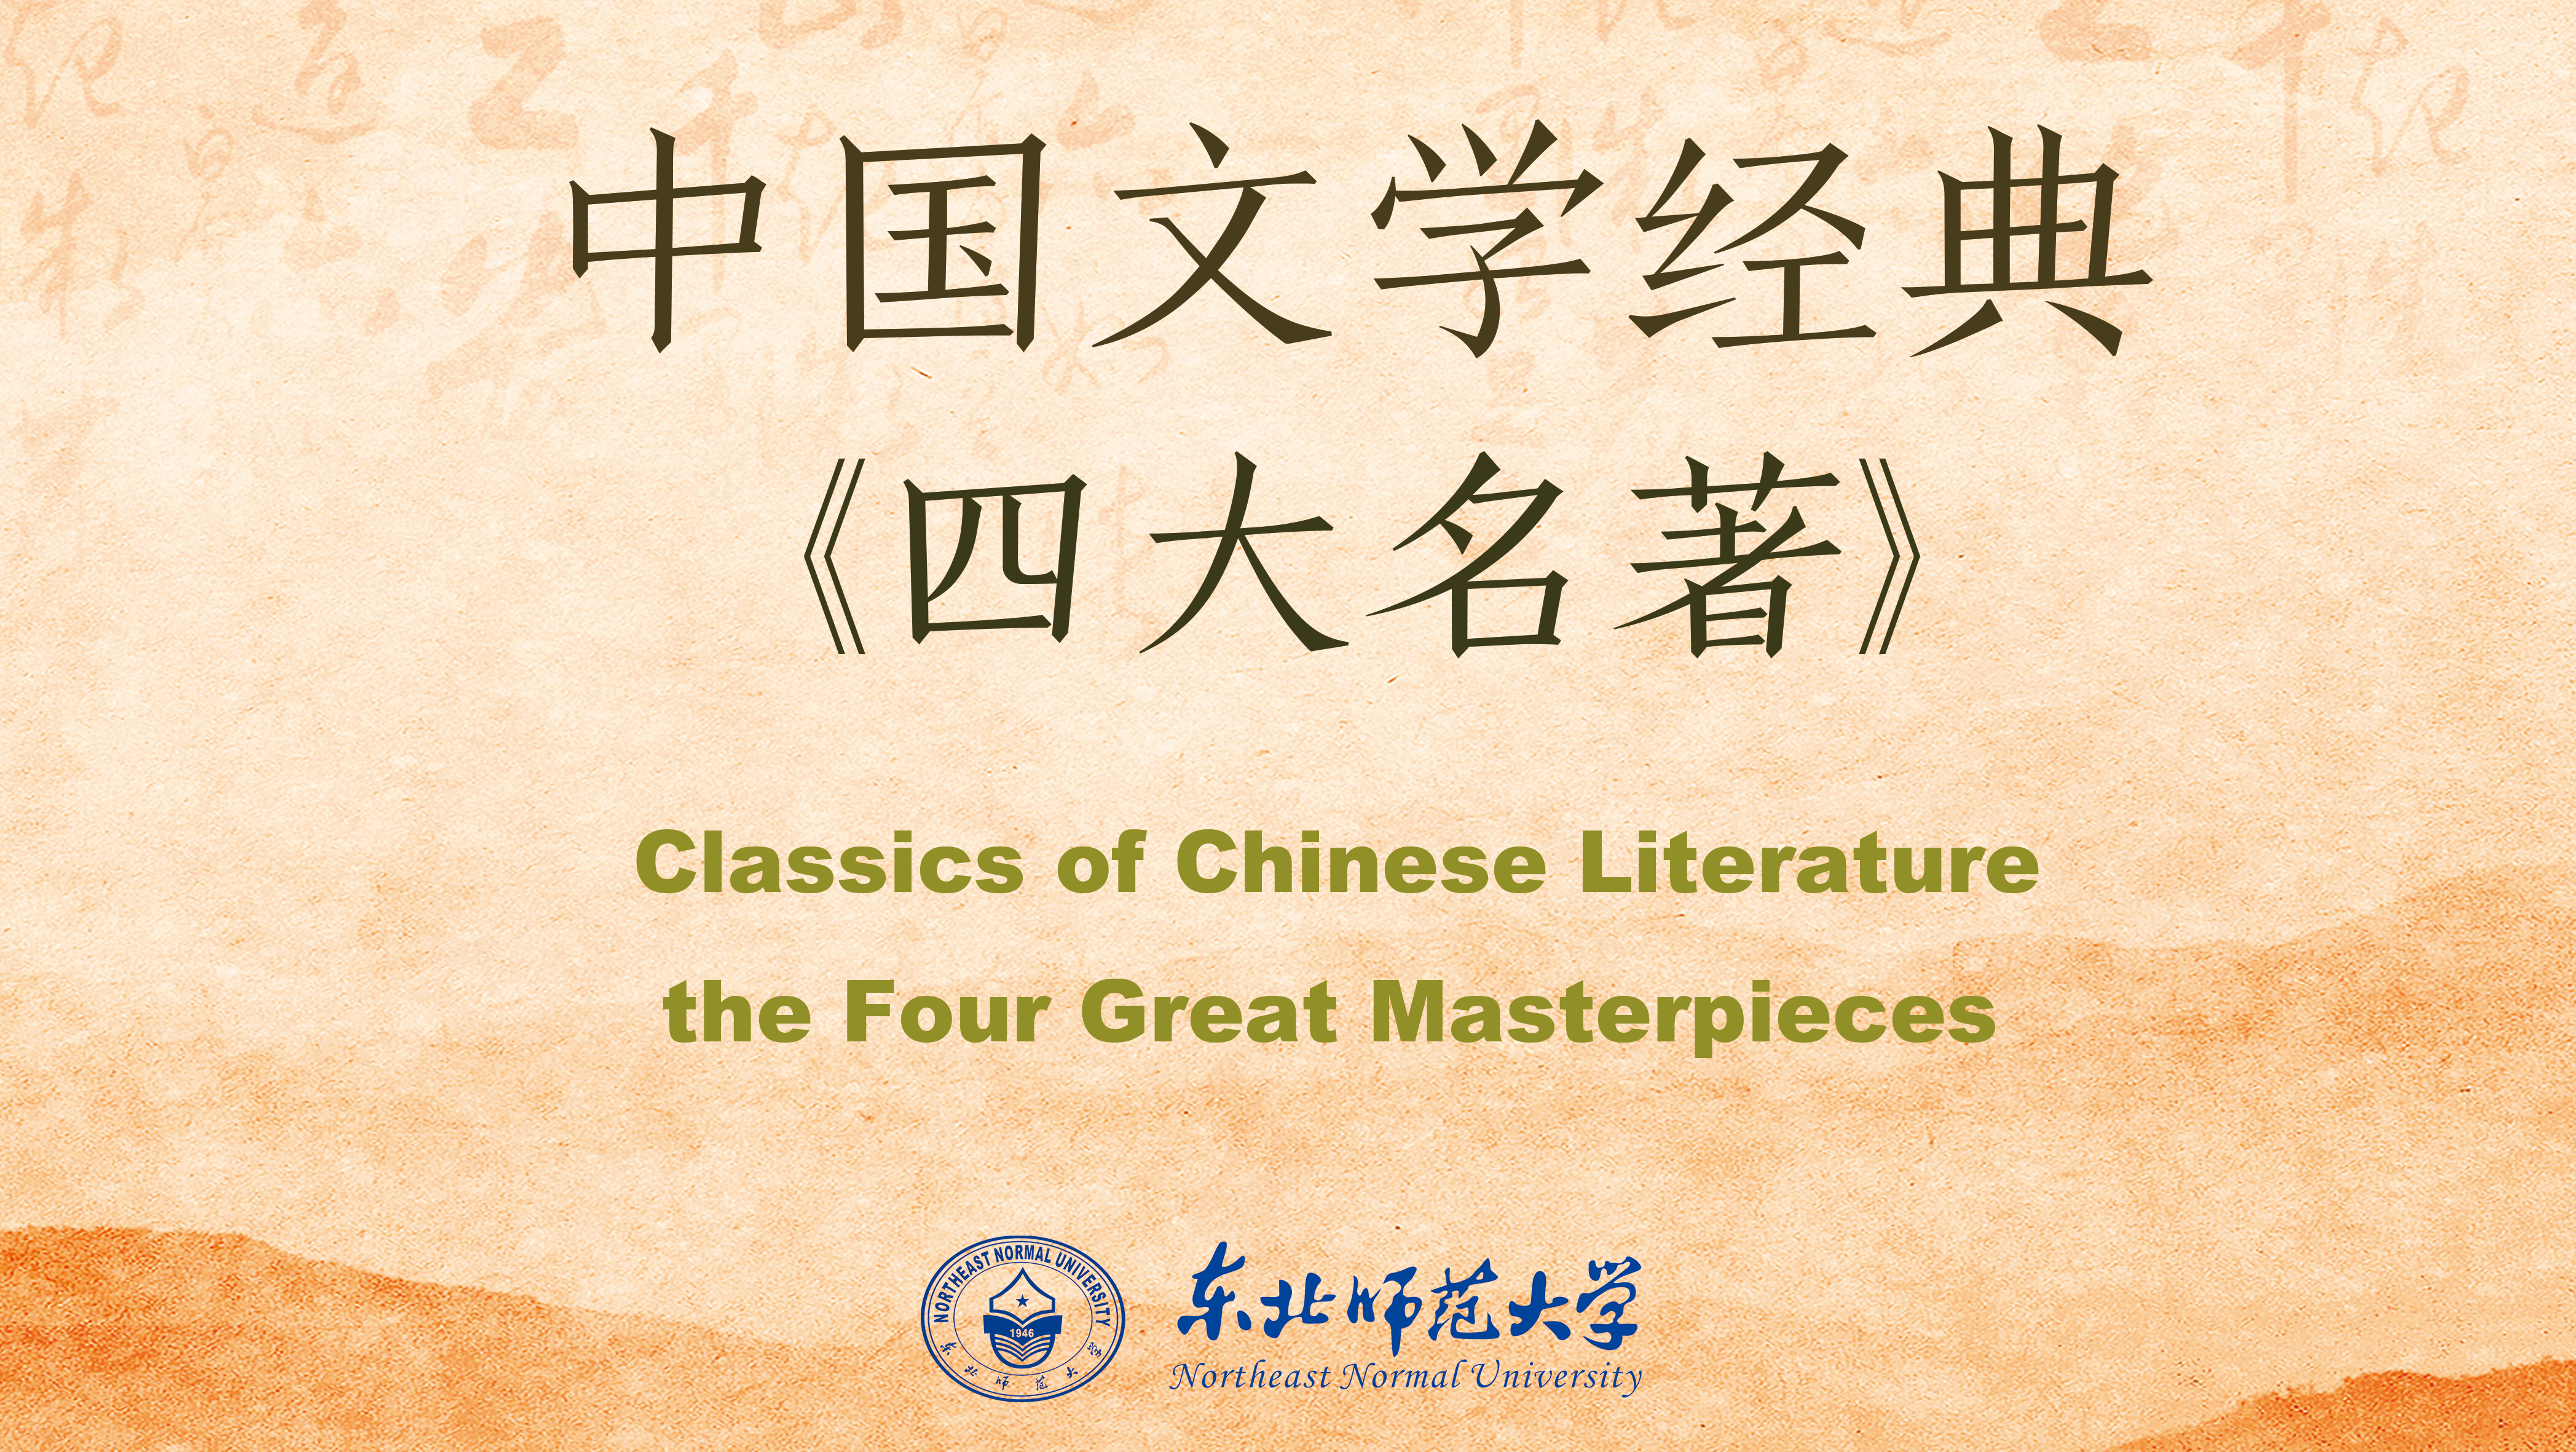 Classics of Chinese Literature - the Four Great Masterpieces